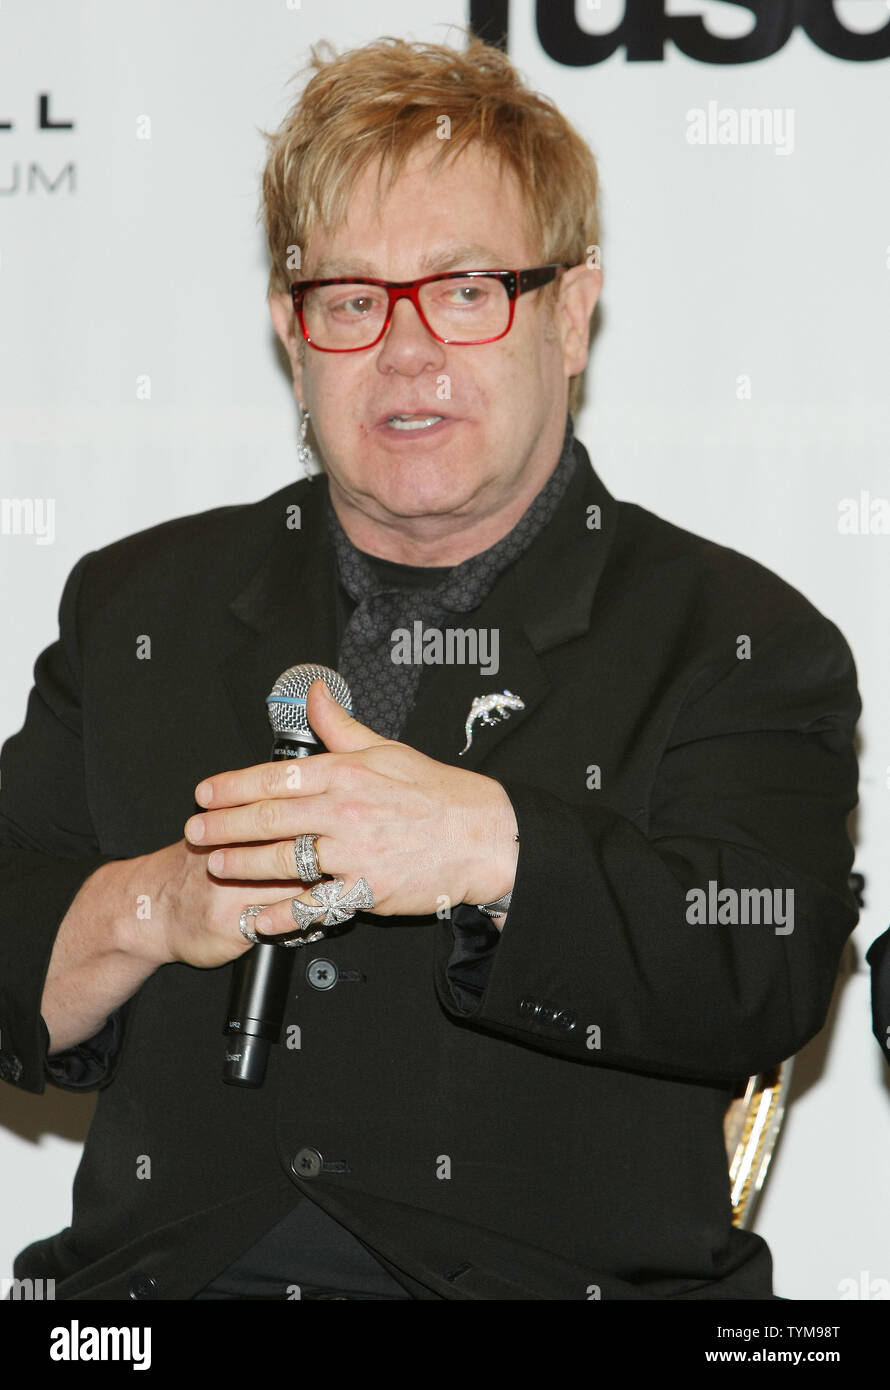 Elton John talks to reporters at the Rock and Roll Hall of Fame induction ceremony where he will introduce inductee Leon Russell at the Waldorf-Astoria hotel in New York on March 14, 2011.      UPI Photo/Monika Graff... Stock Photo